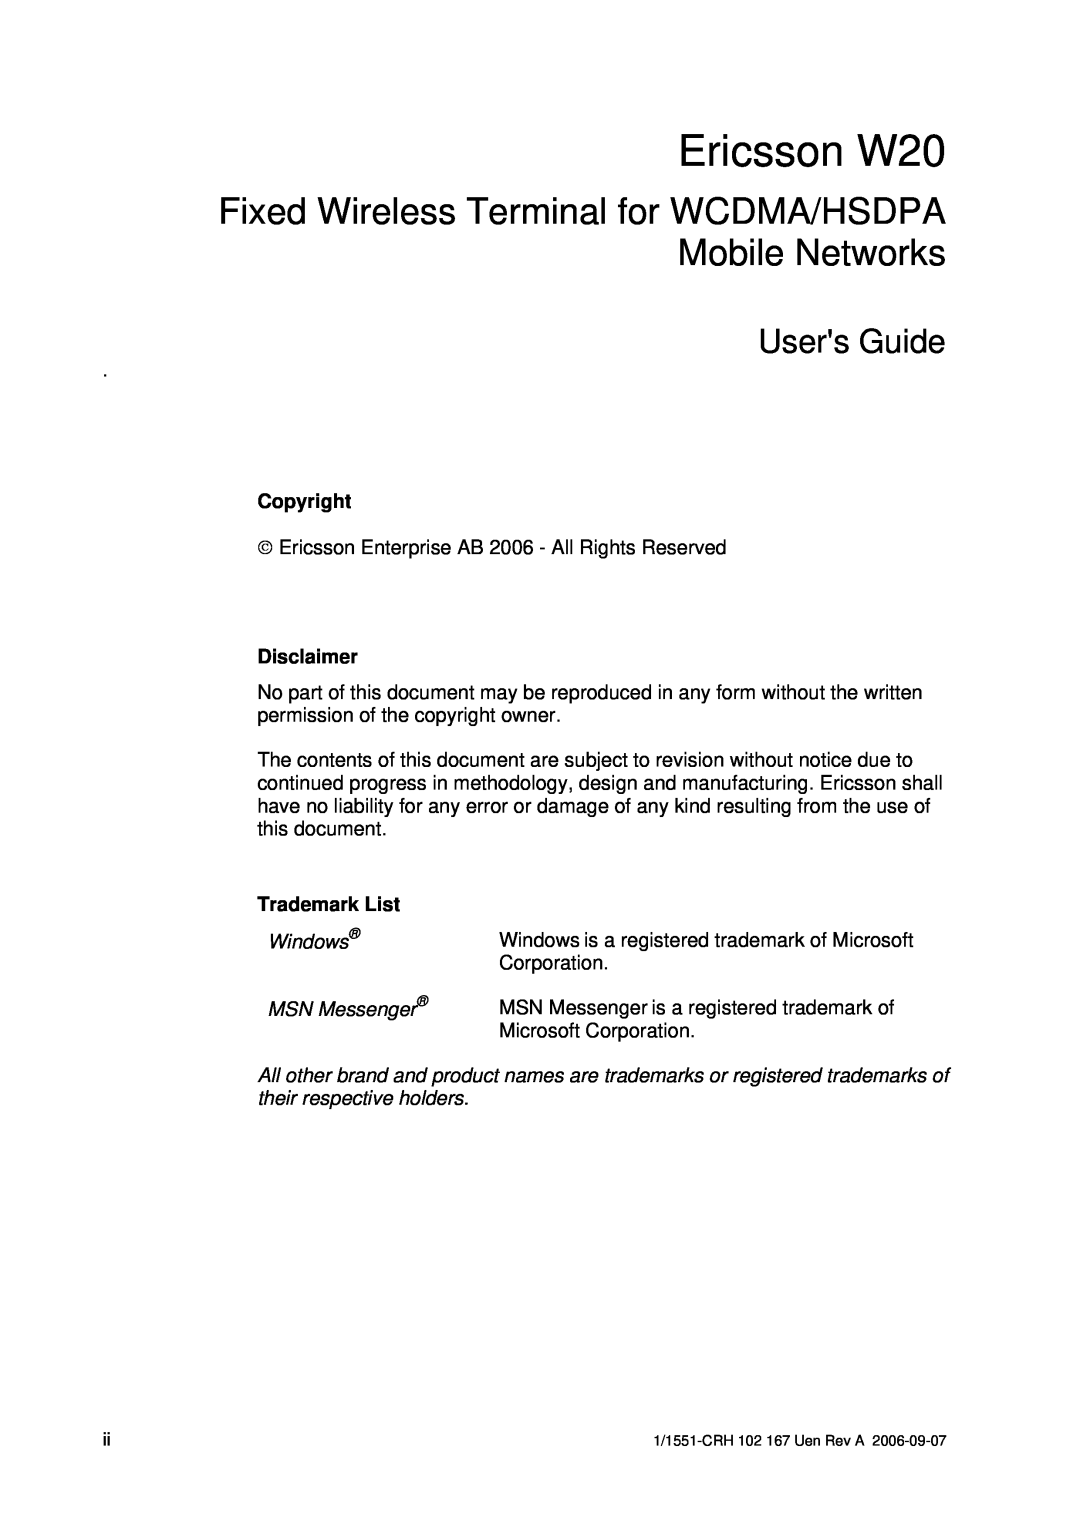 Ericsson Ericsson W20, Fixed Wireless Terminal for WCDMA/HSDPA Mobile Networks, Users Guide, Copyright, Disclaimer 